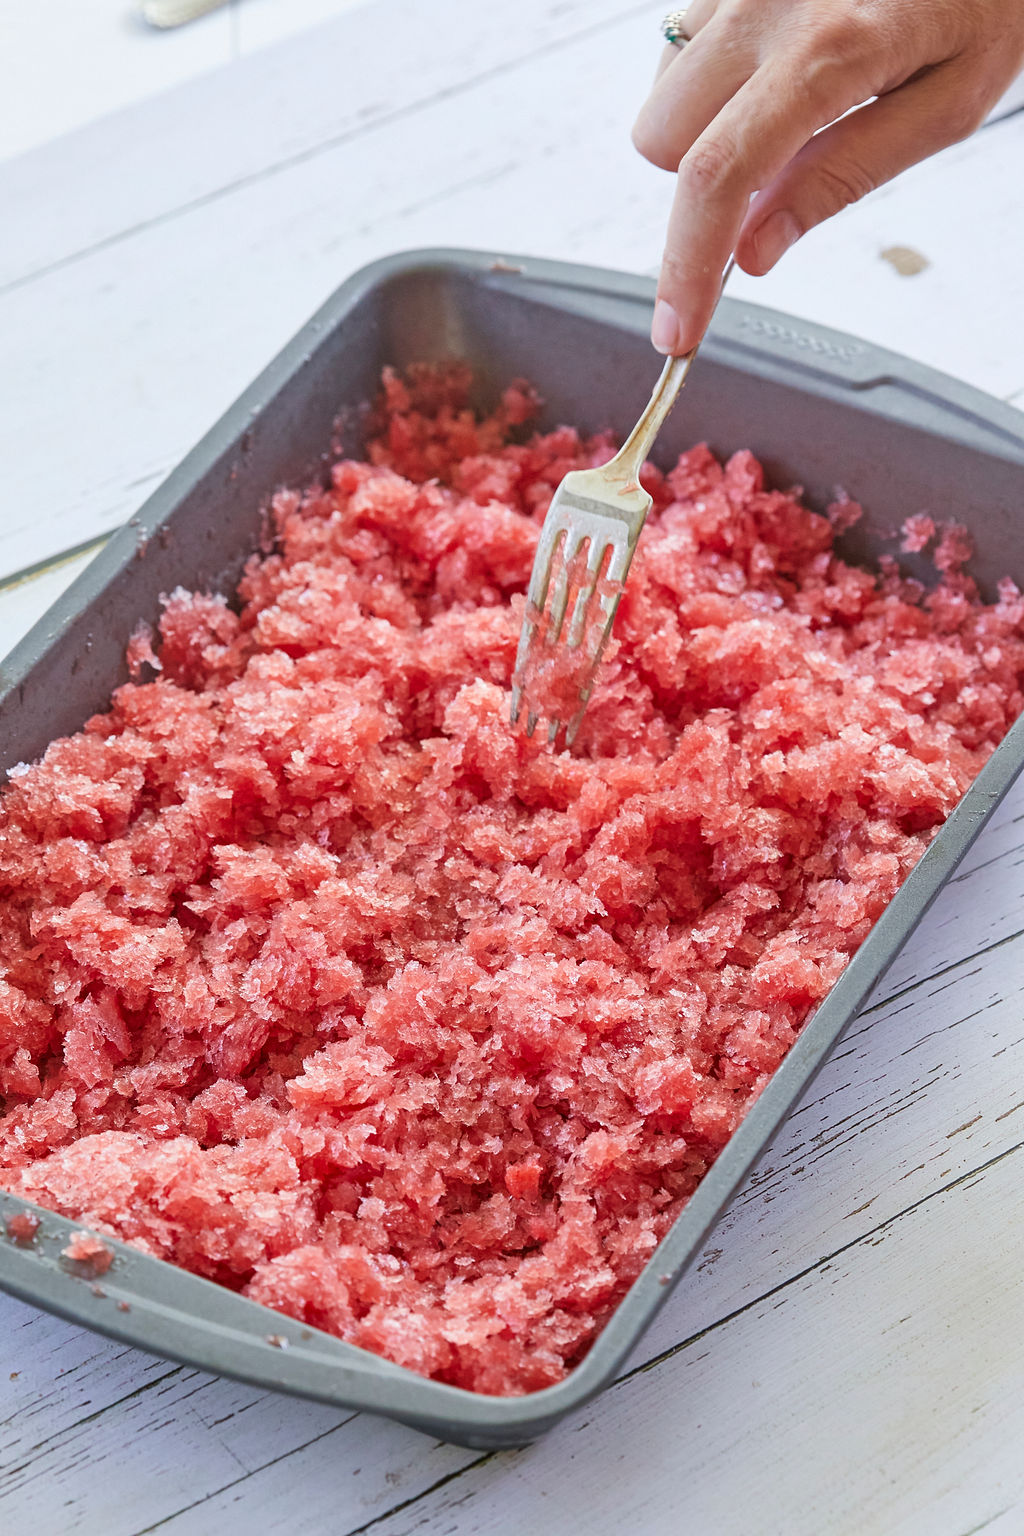 Making my Blood Orange Granita recipe in a baking pan and using a fork to scrape the ice into the right crunchy texture.